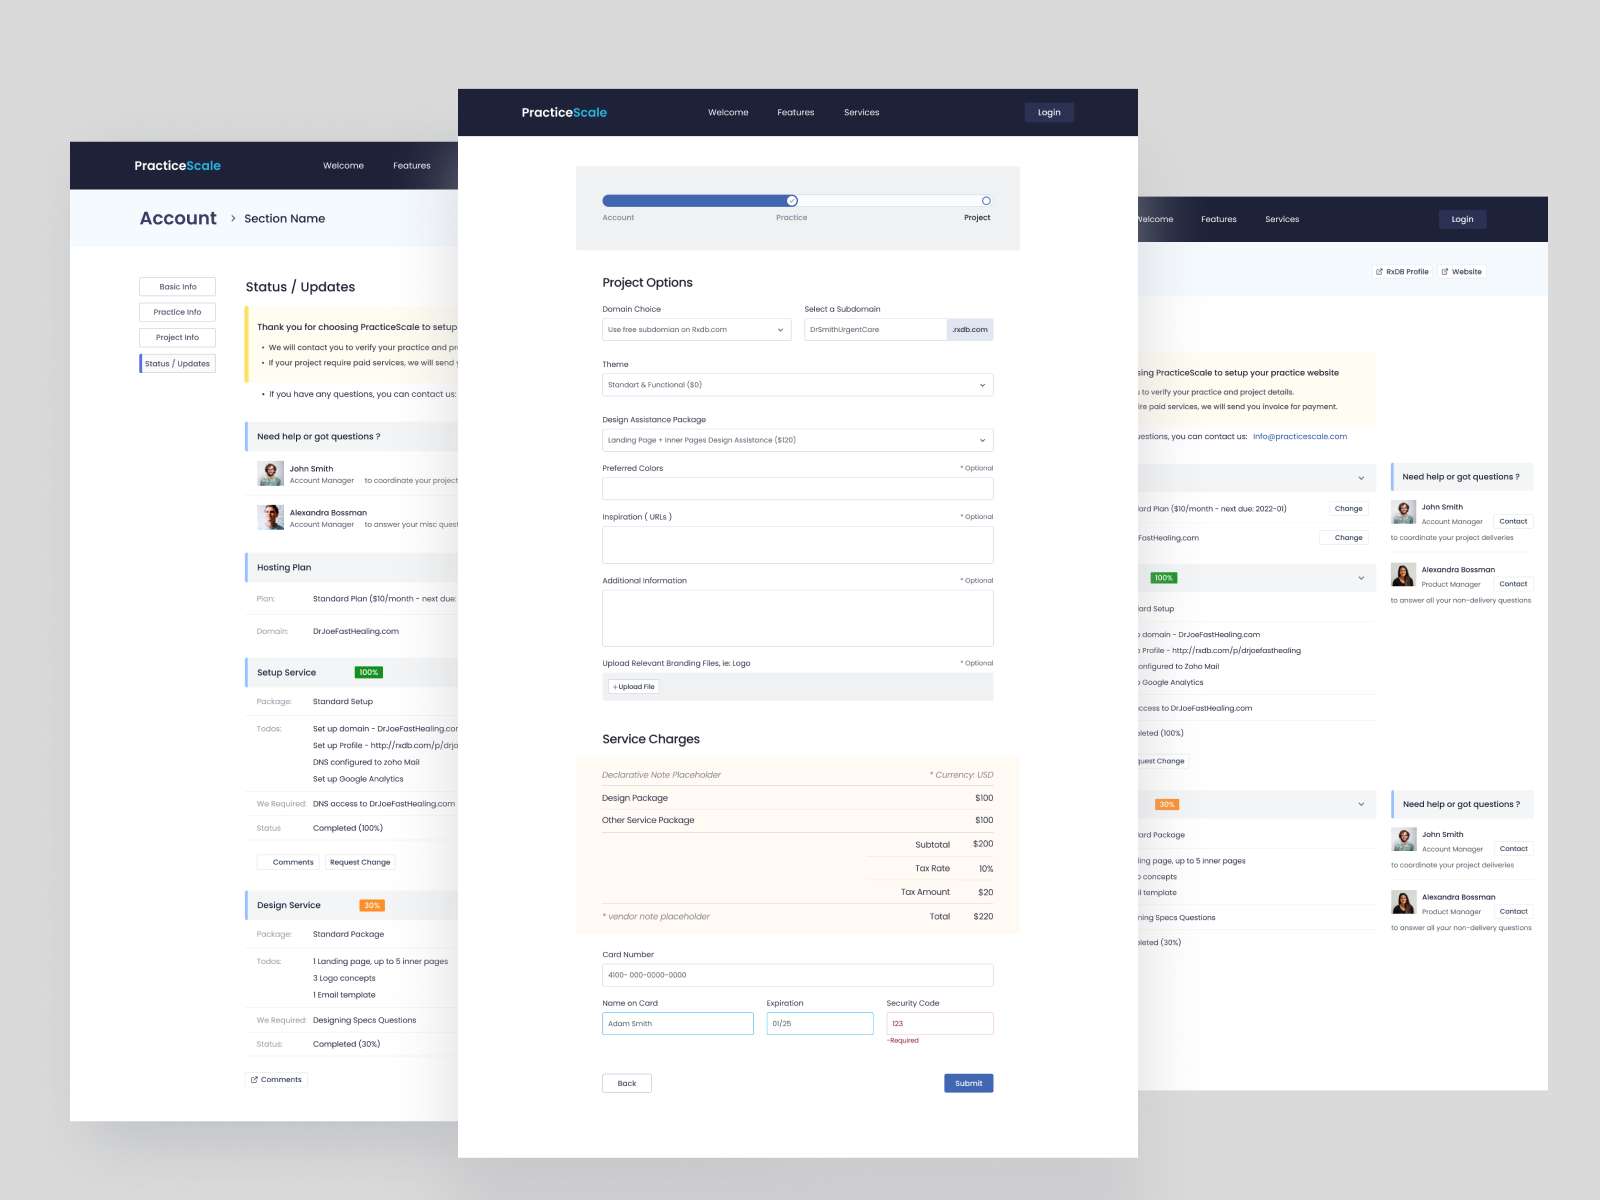 Order Status Form Design by Faysol Ahmed Sozib for Muse Design on Dribbble